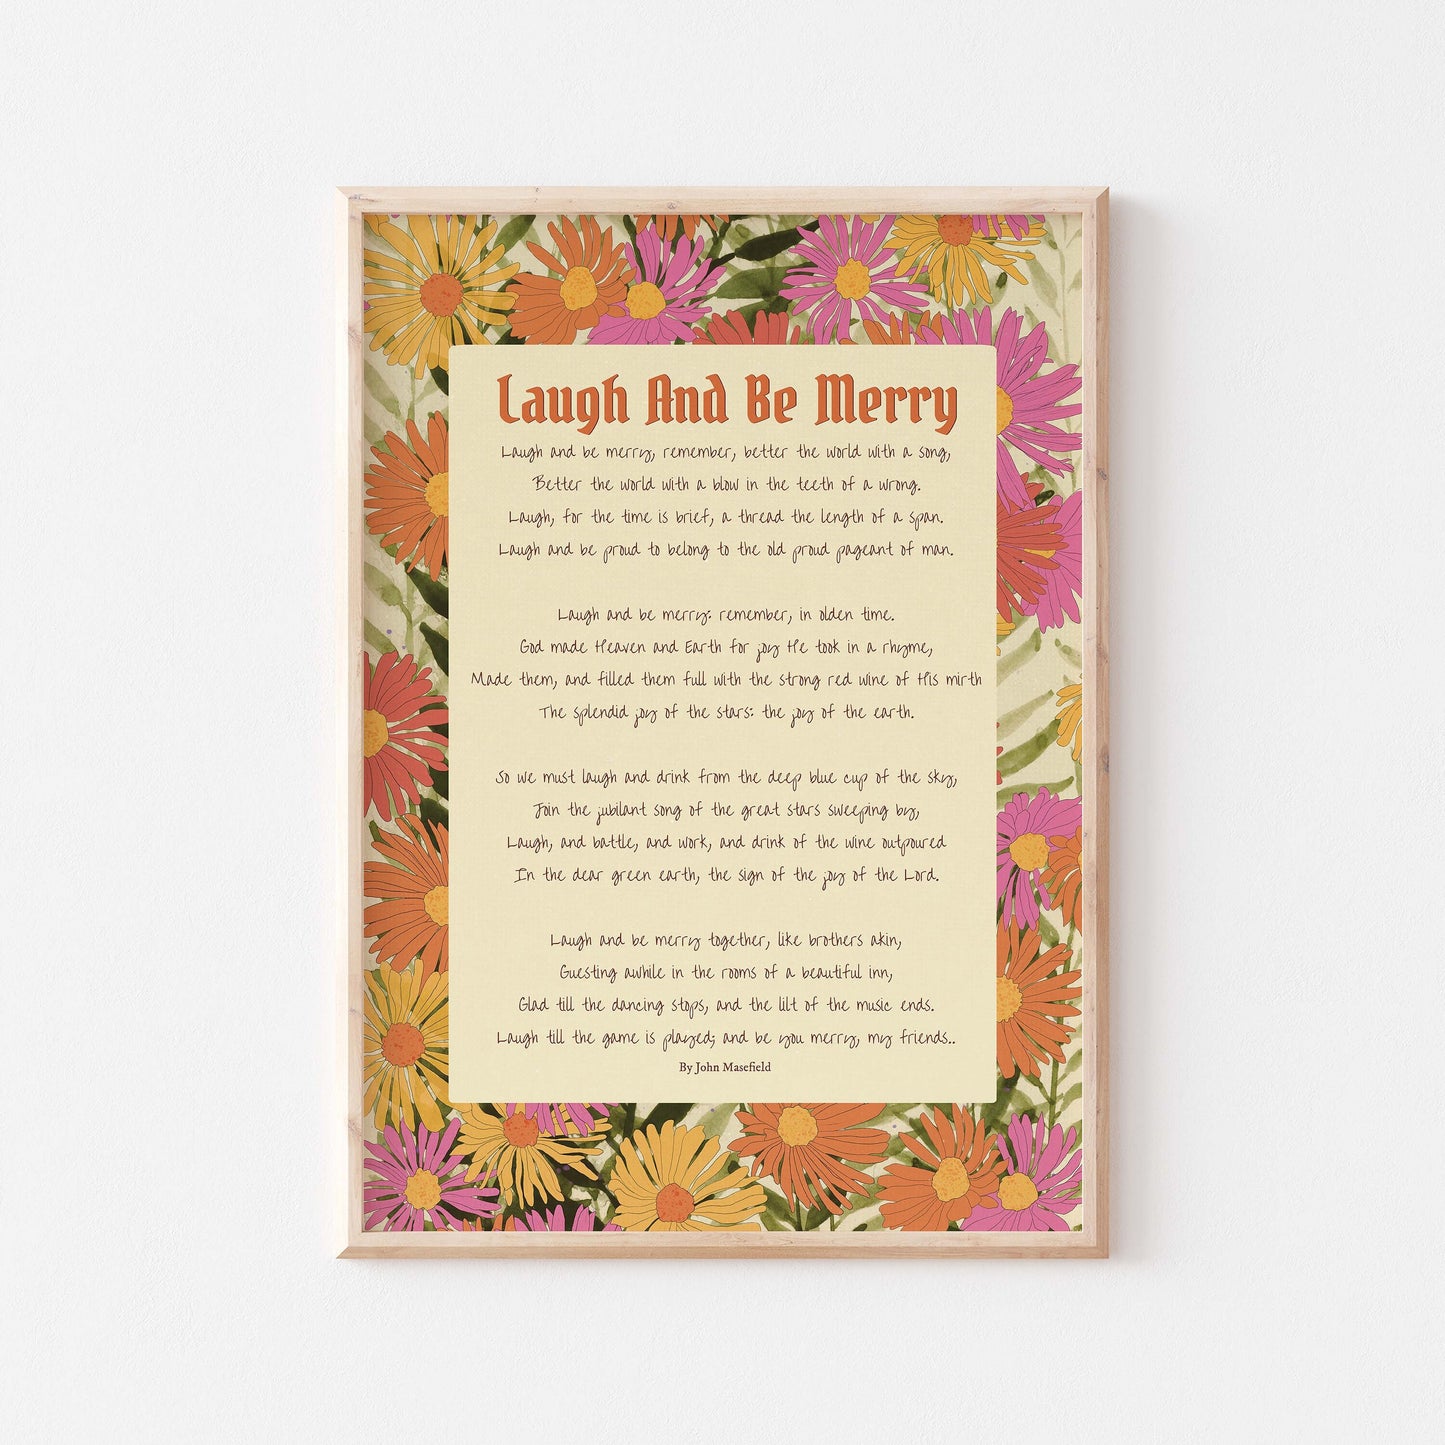 Laugh & Be Merry poem by John Masefield print with floral design in pink, orange, green, beige & yellow in wood frame mockup